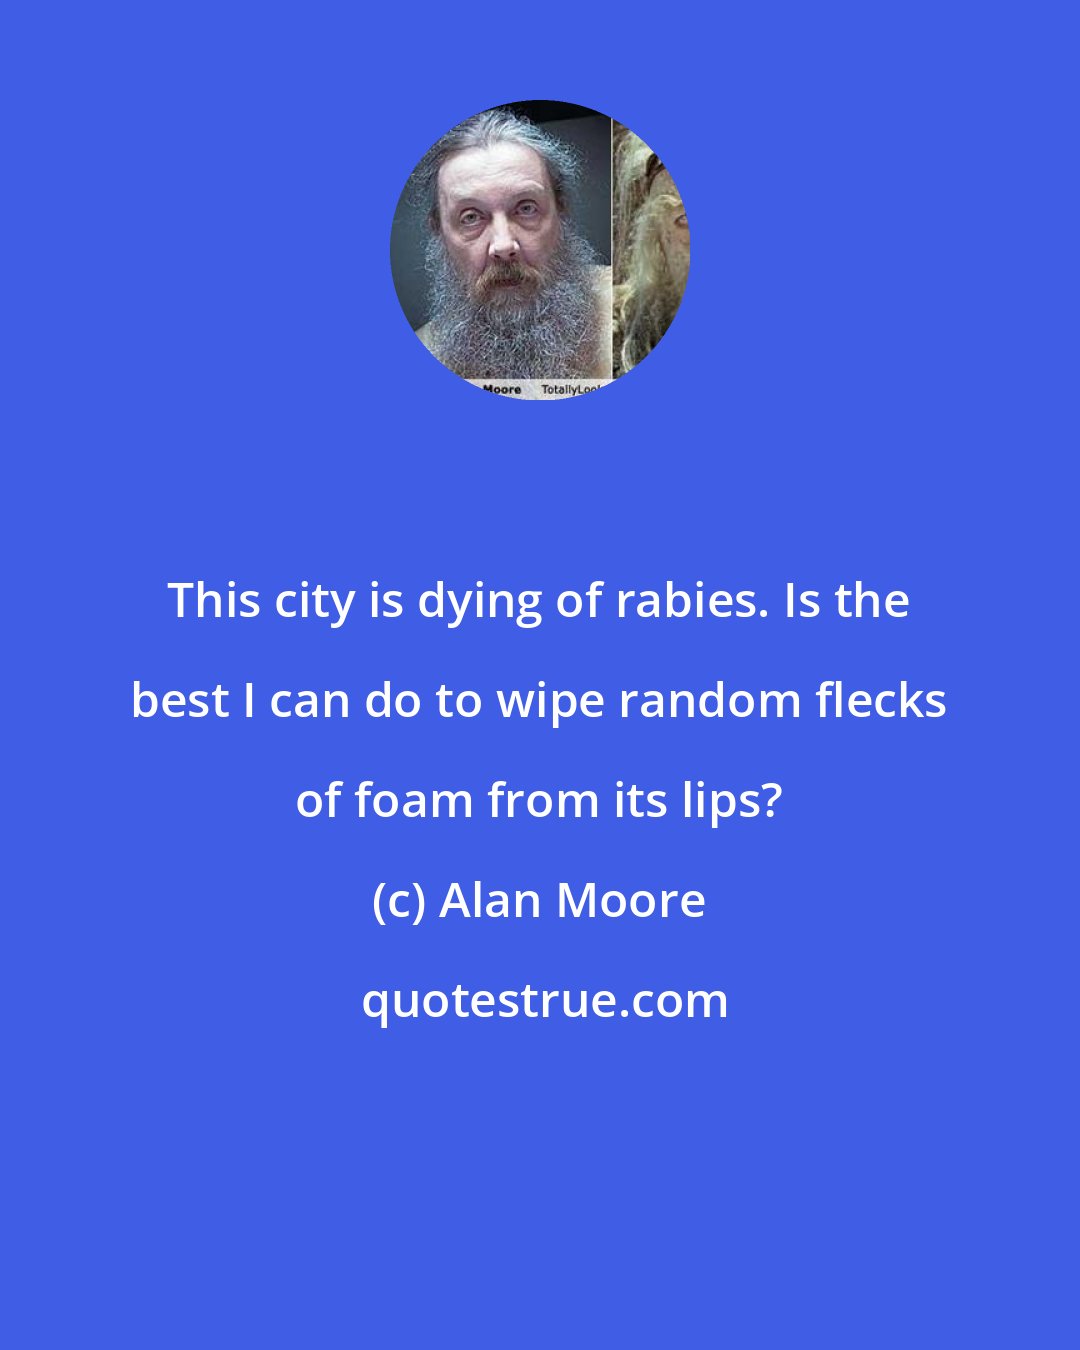 Alan Moore: This city is dying of rabies. Is the best I can do to wipe random flecks of foam from its lips?